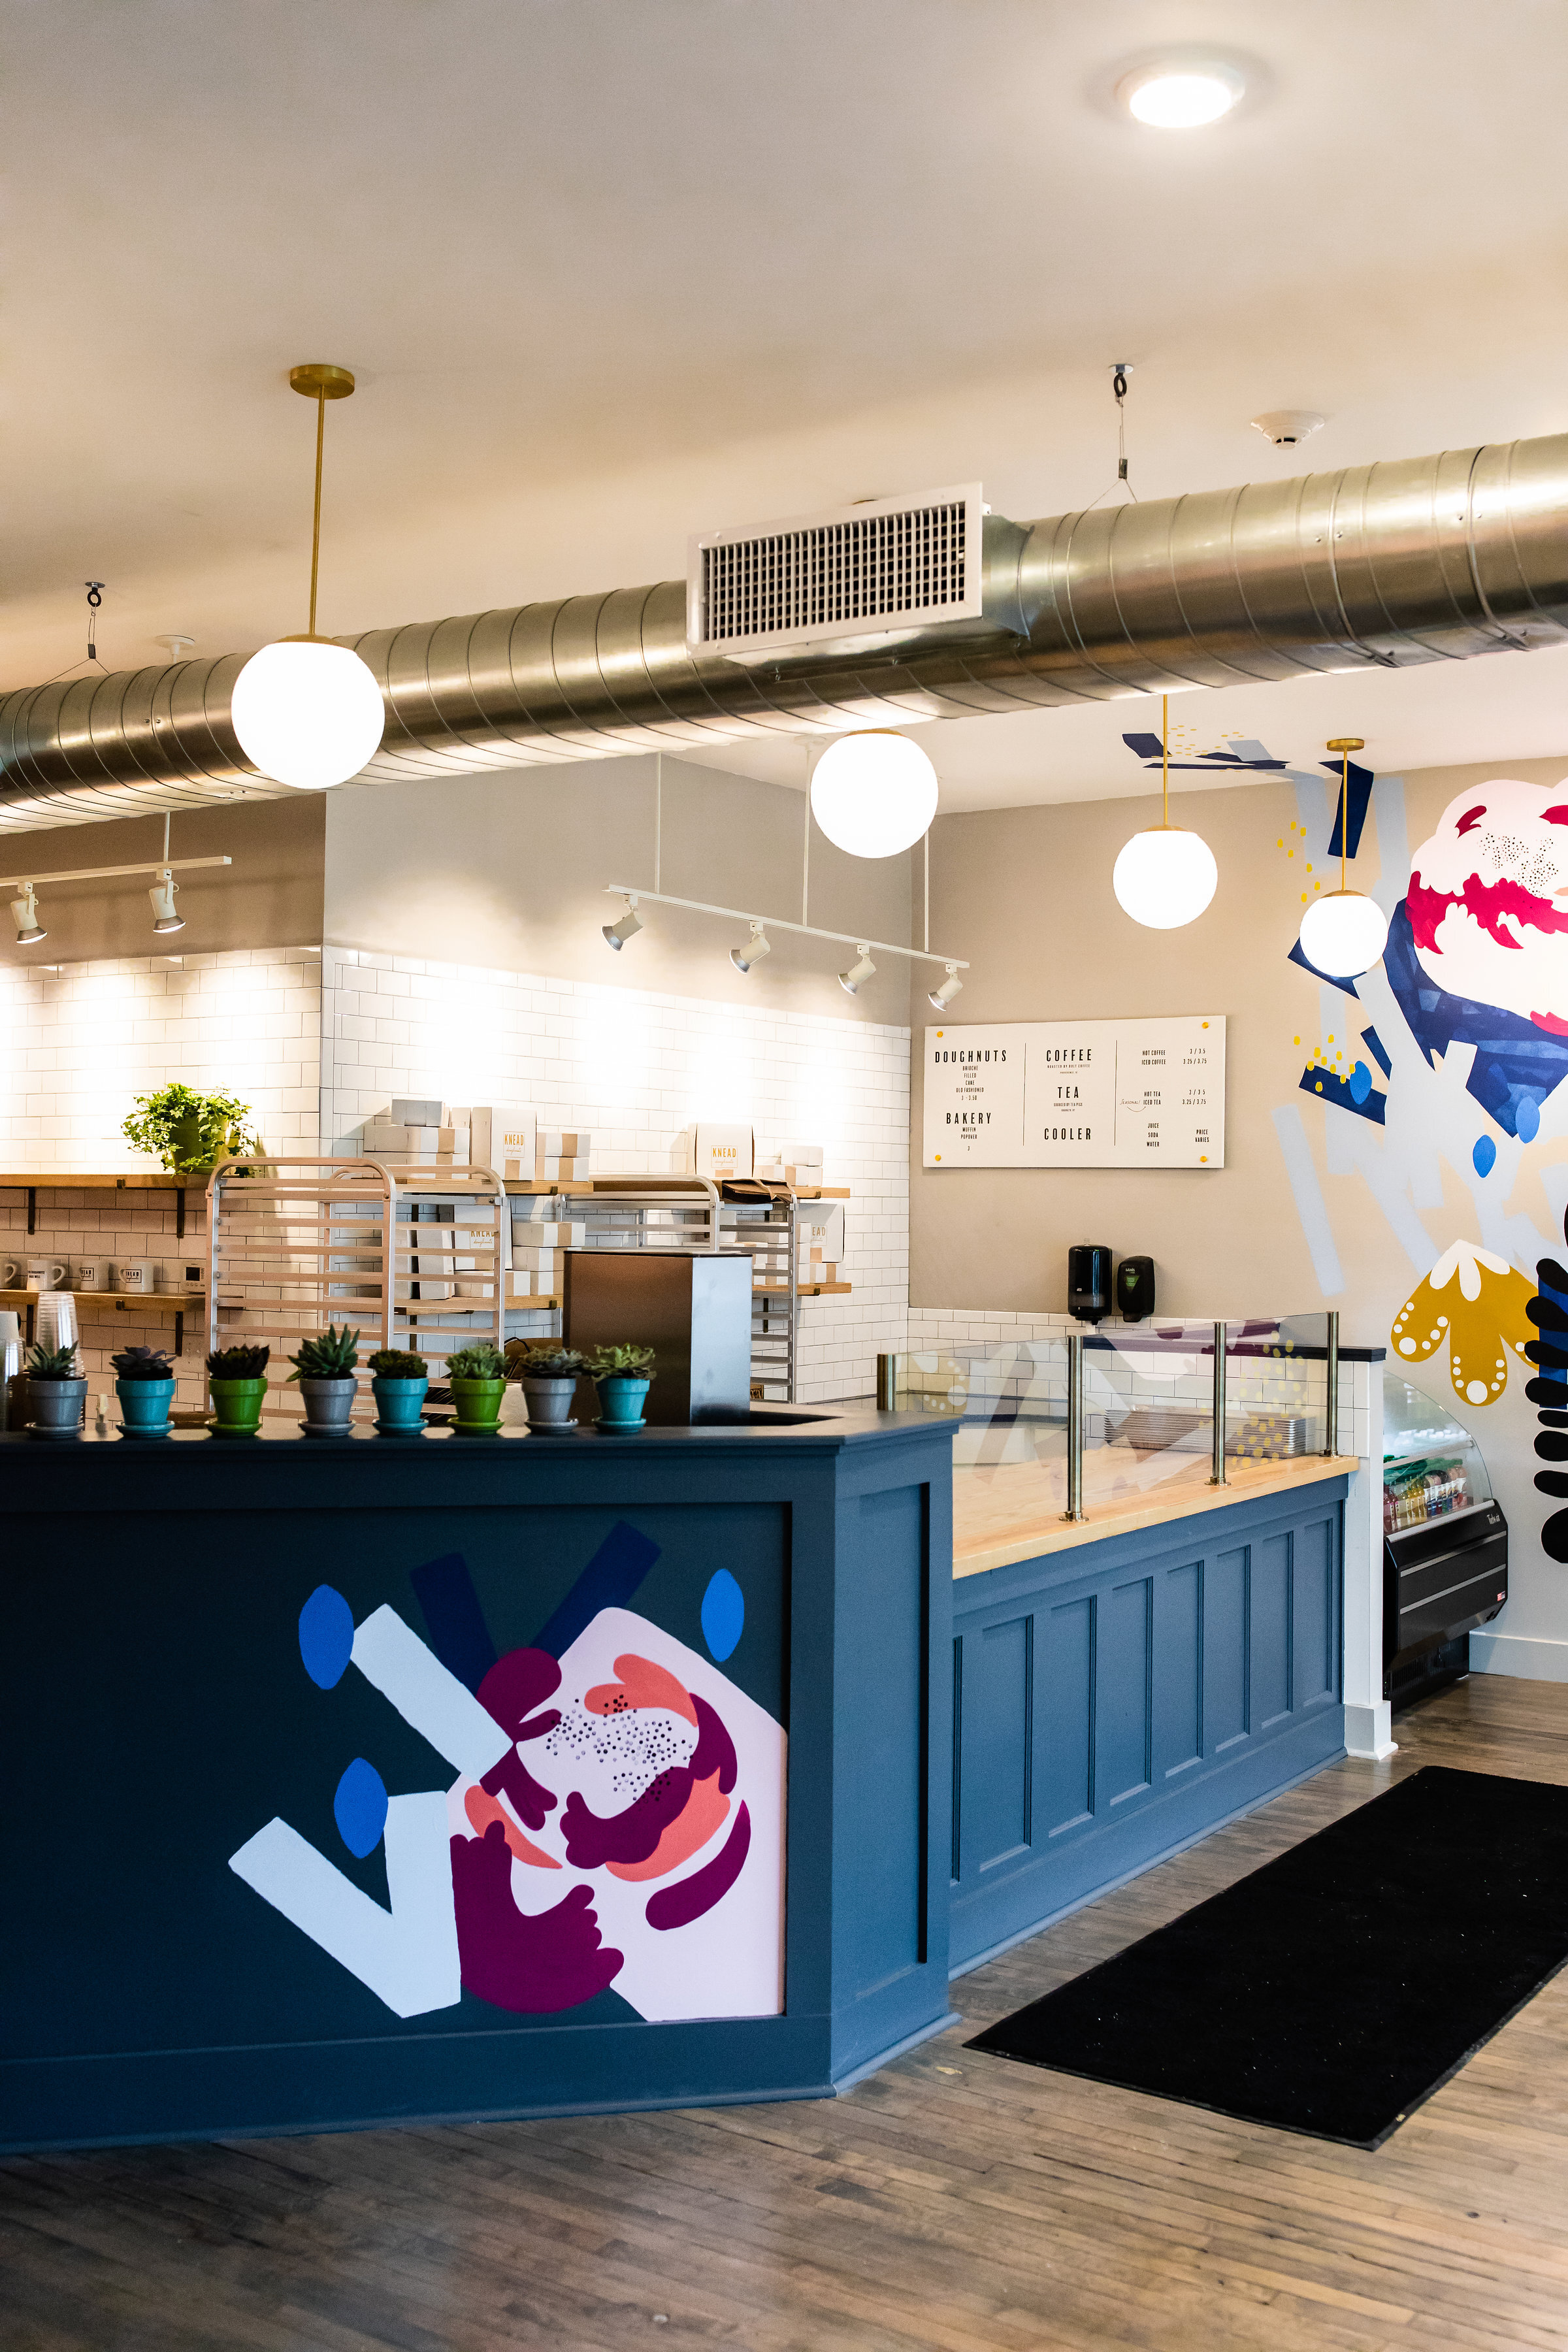  Commissioned mural for Knead Doughnuts at 135 Elmgrove Ave. in Providence, Rhode Island. This piece was designed and painted by hand in April 2018. 